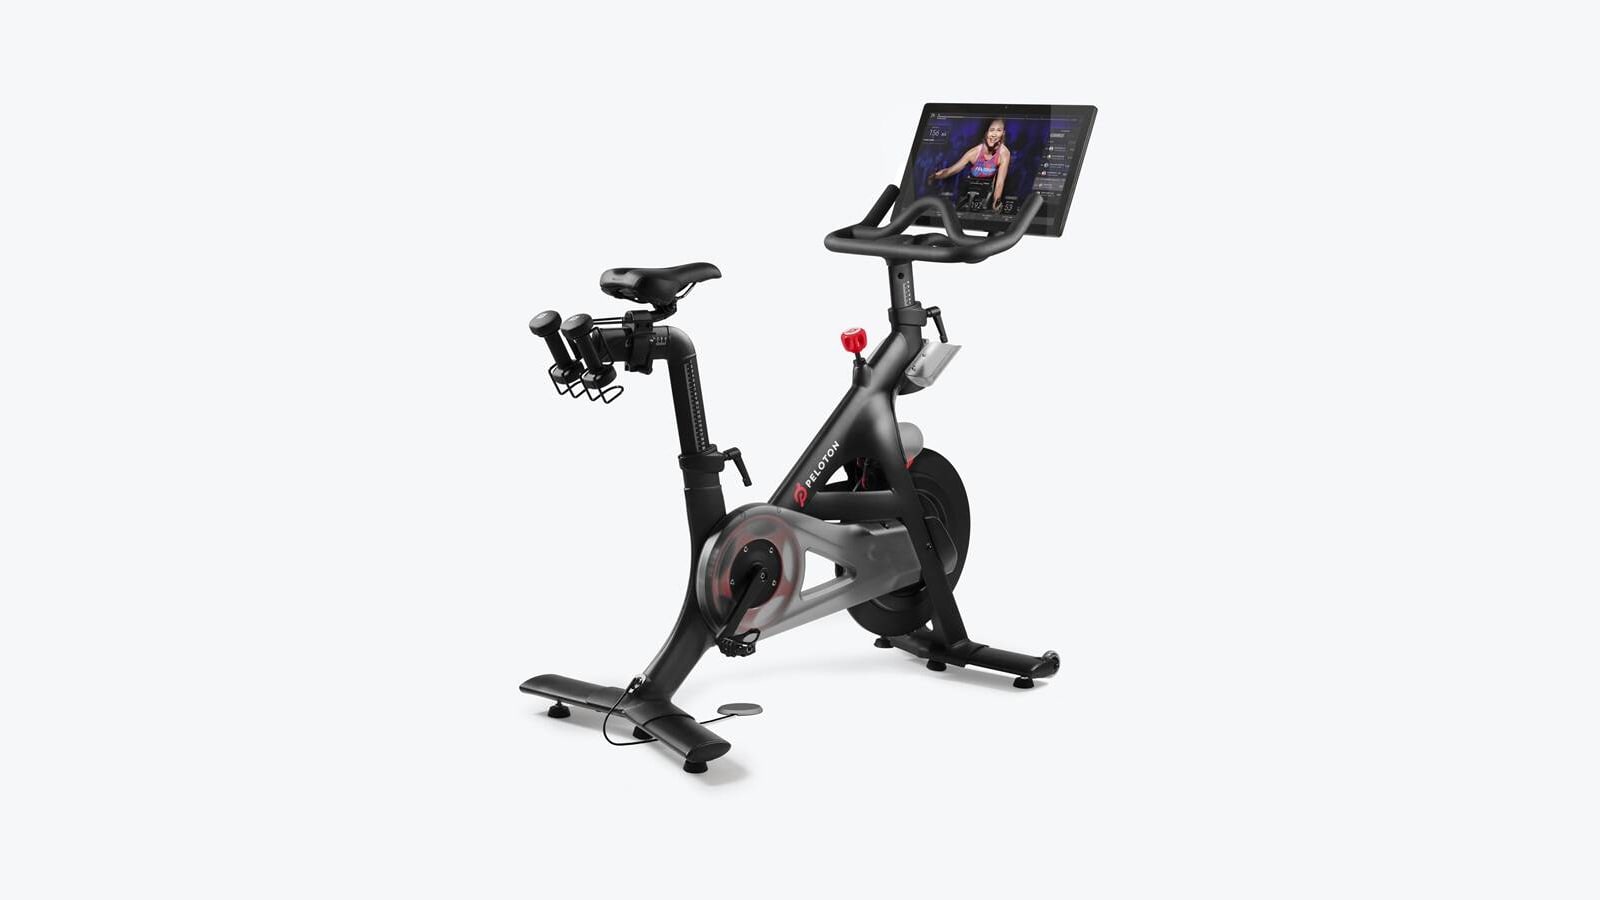 Peloton Bike review: Everything to know before buying